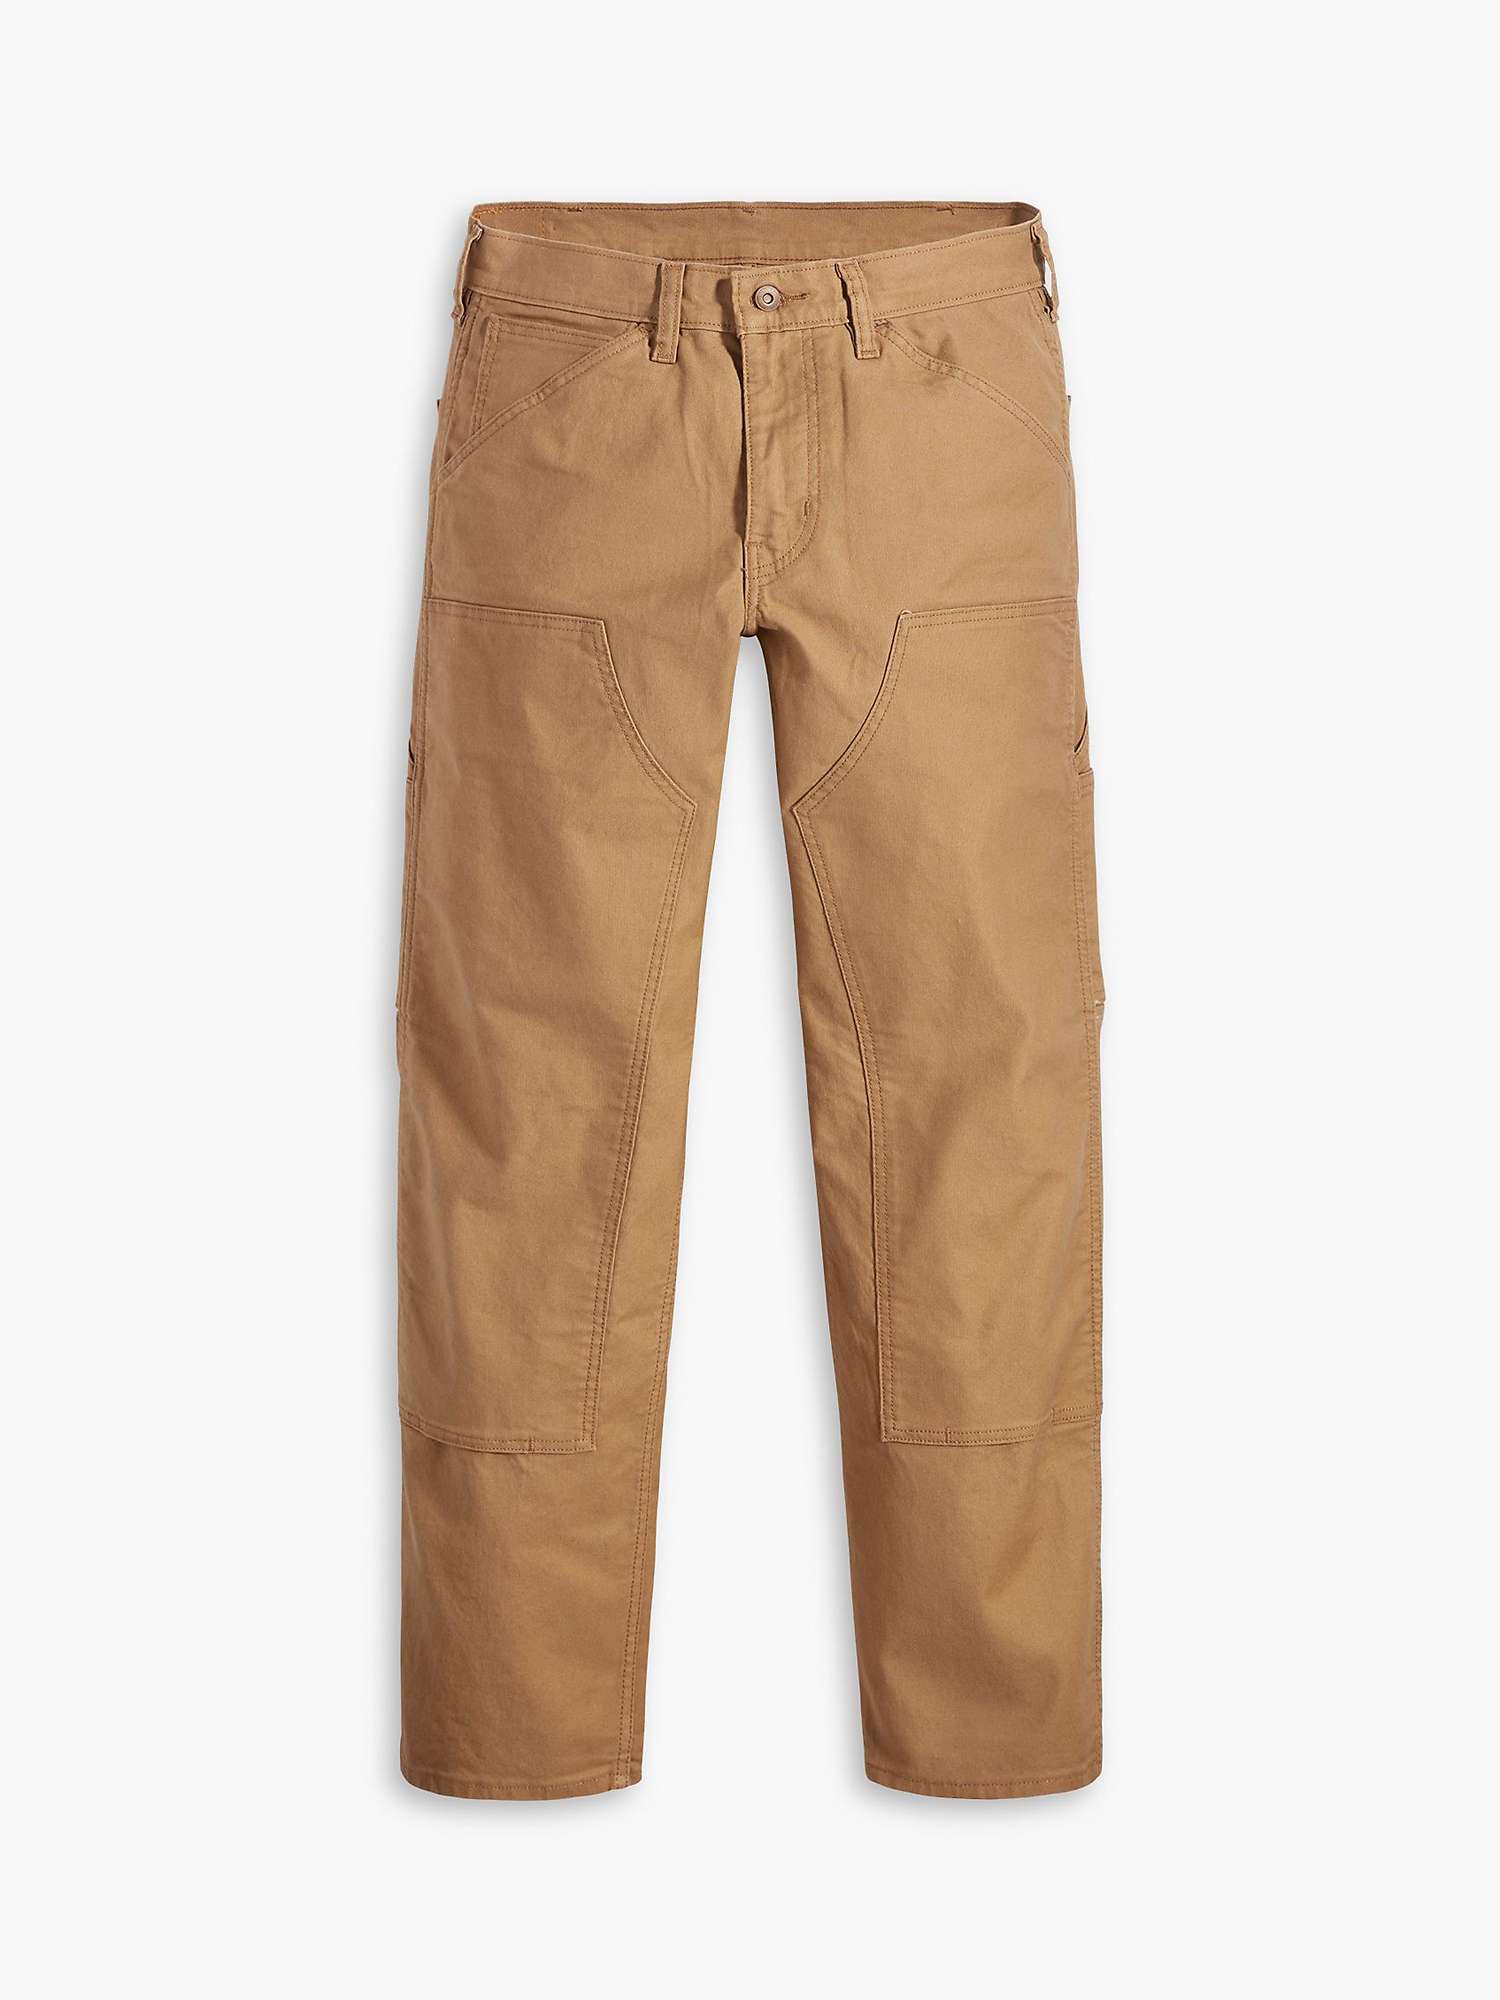 Buy Levi's Workwear 565 Jeans Online at johnlewis.com